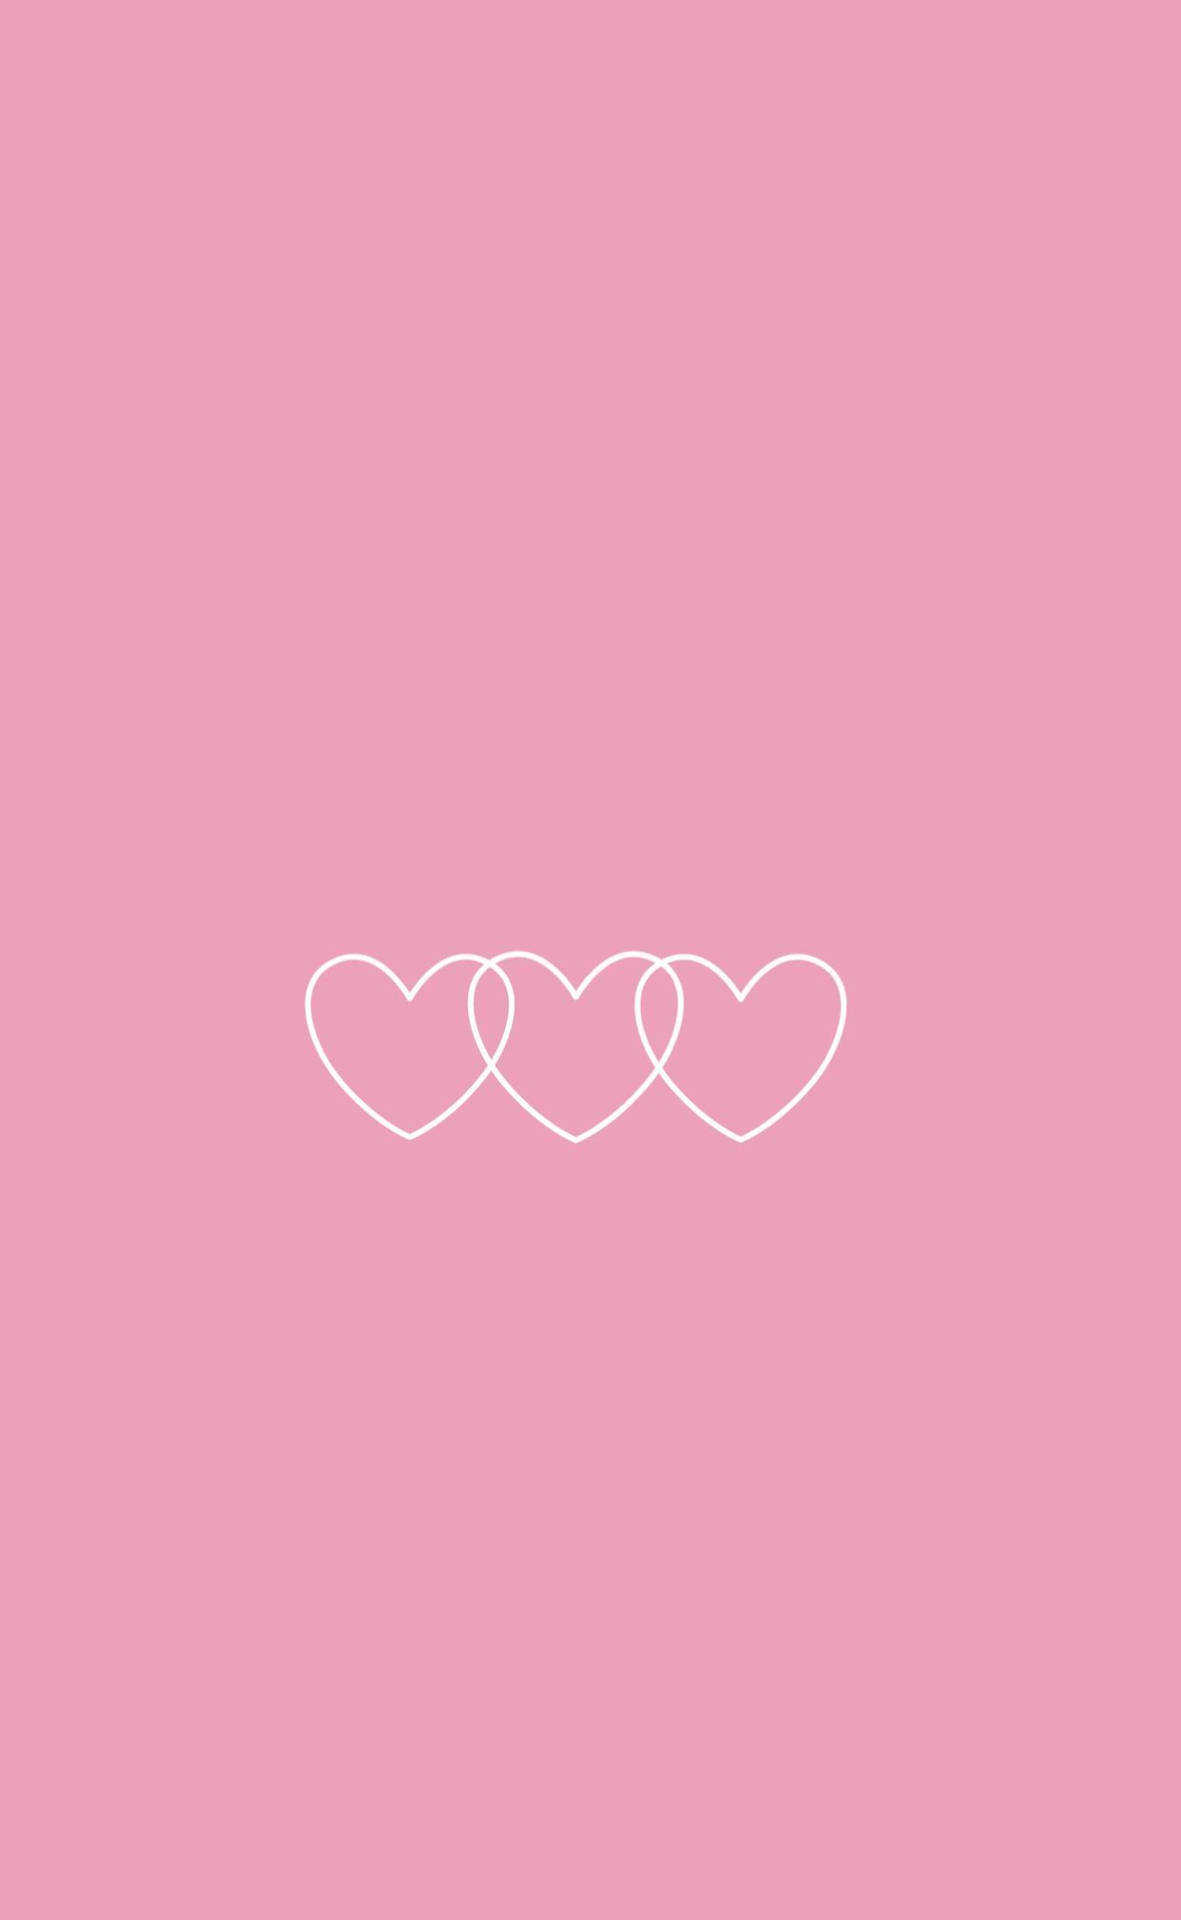 Three Overlapping Pastel Pink Heart Art Background